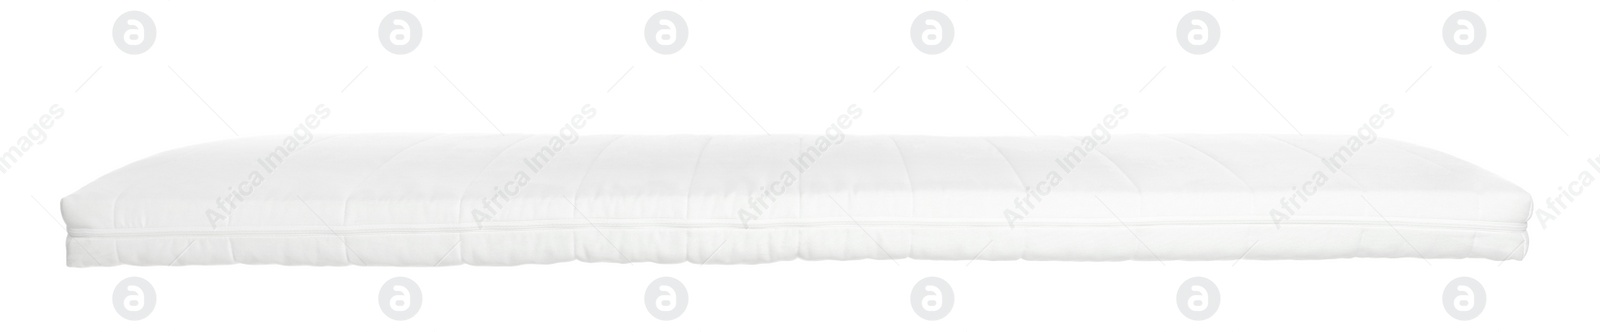 Photo of One new comfortable mattress isolated on white